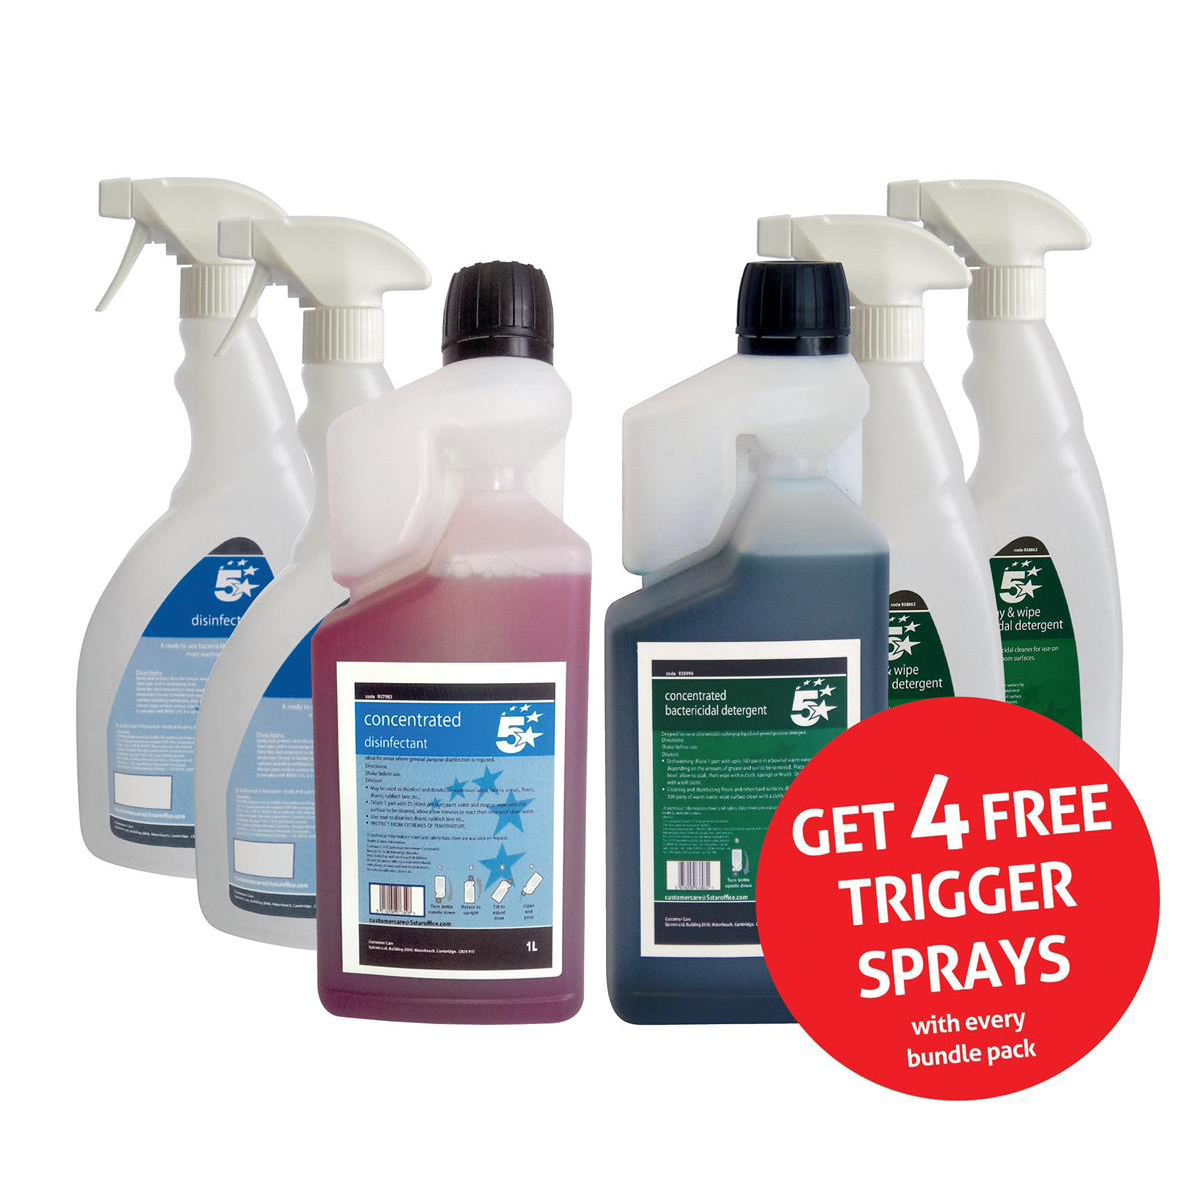 5 STAR DISINFECT & BAC DETERGENT OFFER